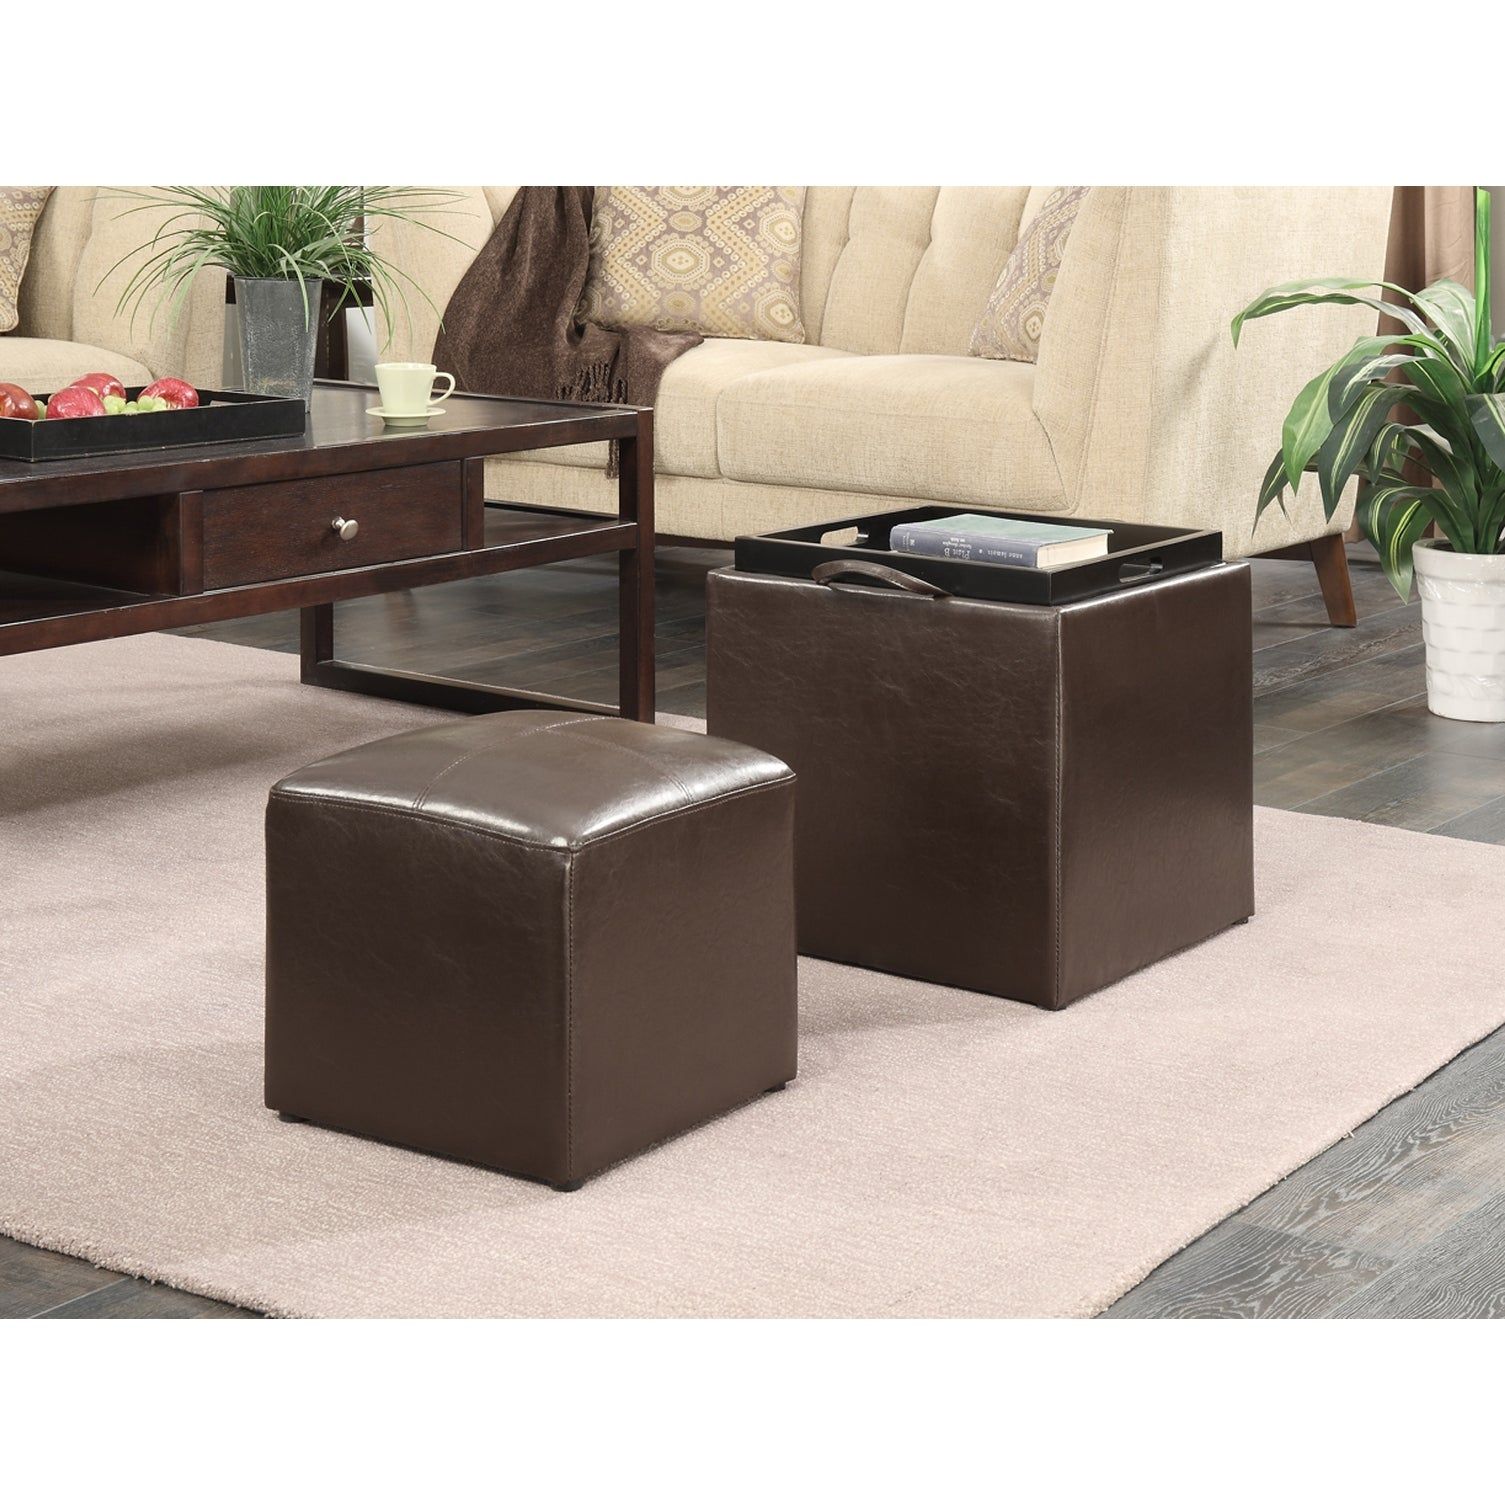 Porch & Den Logan Single Ottoman With Stool And Reversible Tray – On Sale –  Overstock – 20528587 Inside Ottomans With Stool And Reversible Tray (View 5 of 15)